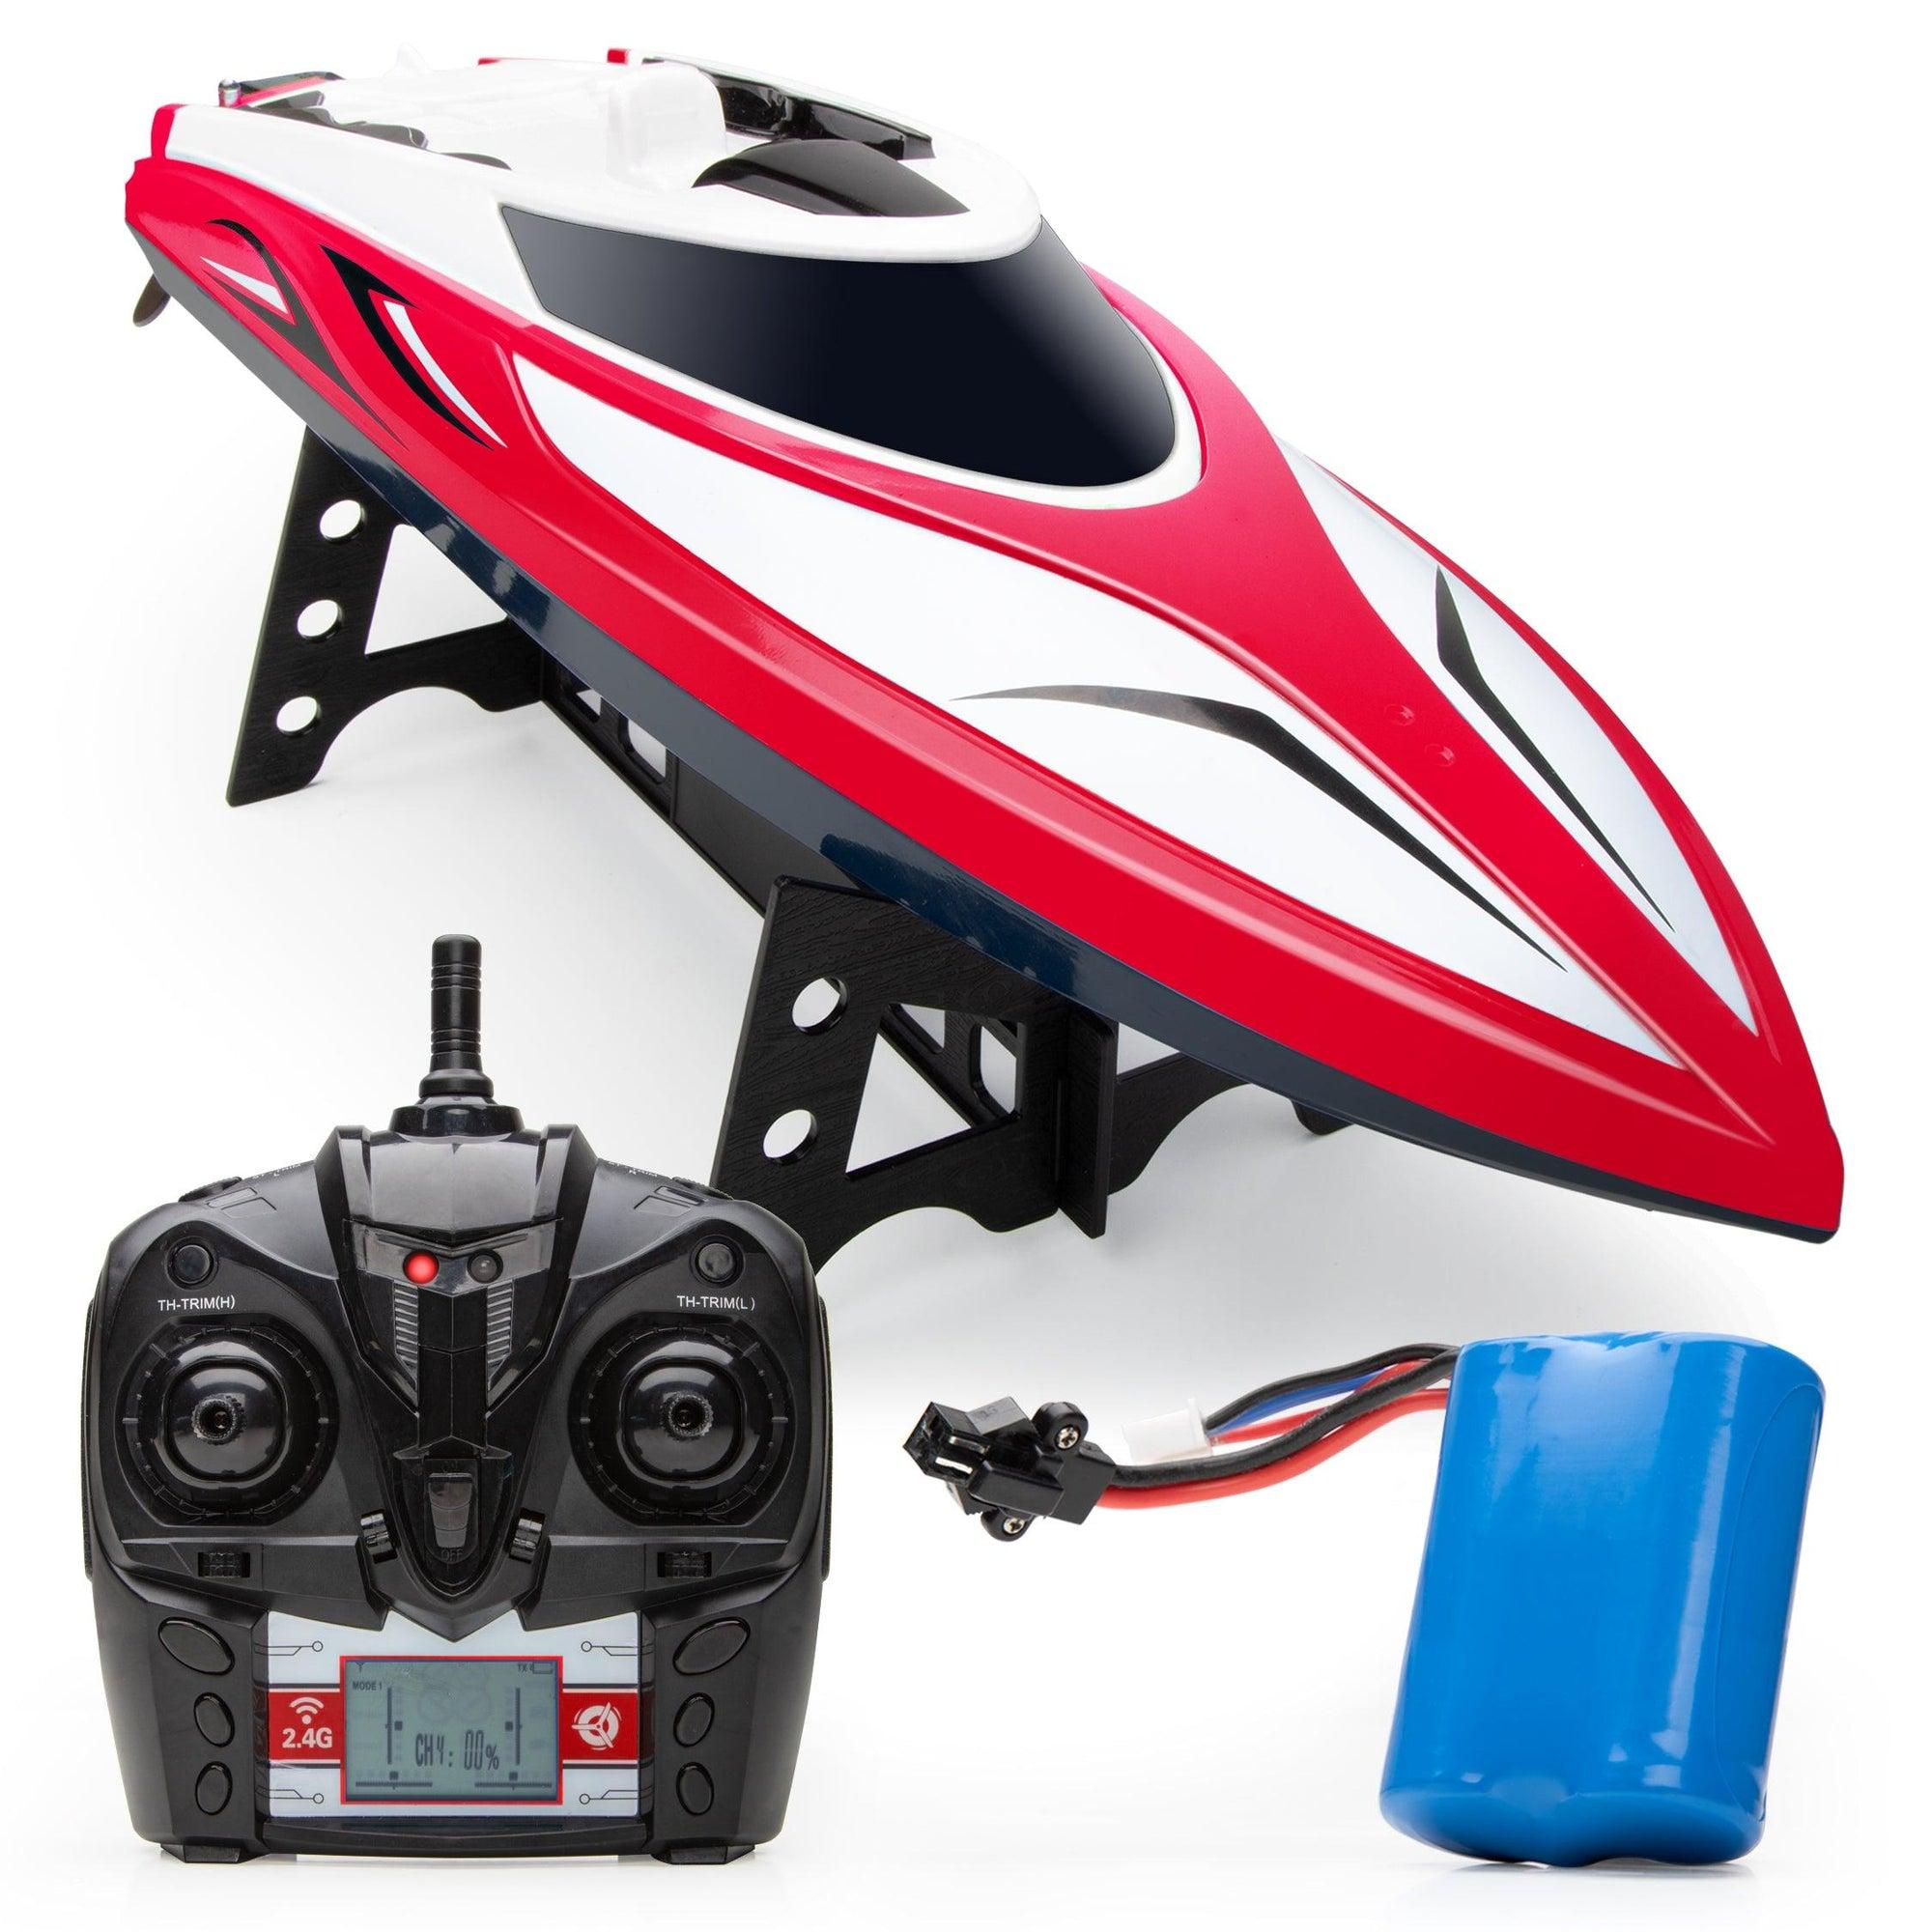 Rc Boat Warehouse: Redefine your RC boating experience with top brands at RC Boat Warehouse